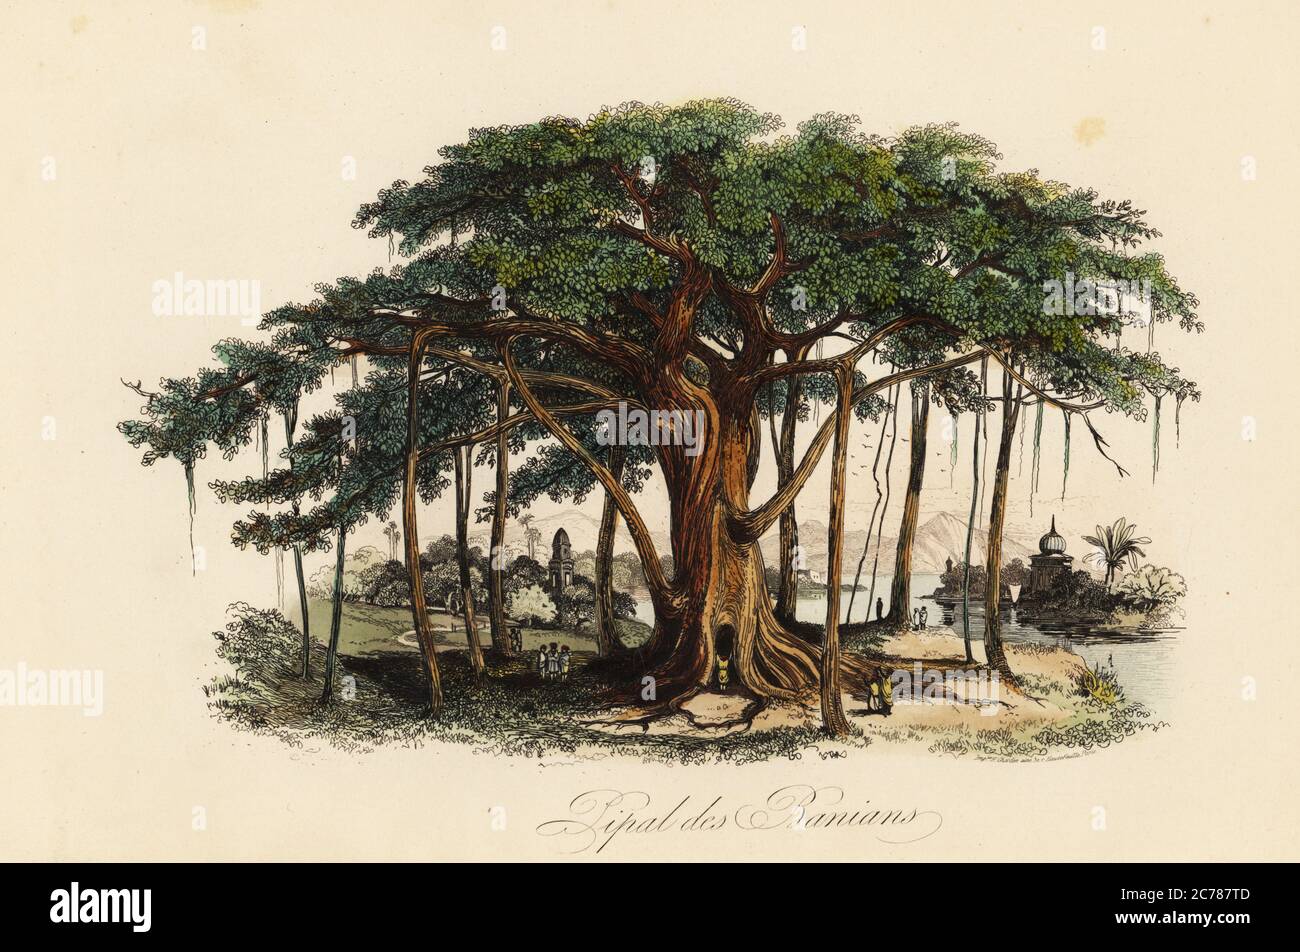 Sacred fig tree, Ficus religiosa, also known as the bodhi tree, banian tree, banyan tree, pippala tree, peepul tree, peepal tree or ashwattha tree. Pipal des banians. Handcoloured steel engraving printed by F. Chardon from Achille Comte’s Musee d’Histoire Naturelle, Museum of Natural History, Gustave Hazard, Paris, 1854. Stock Photo